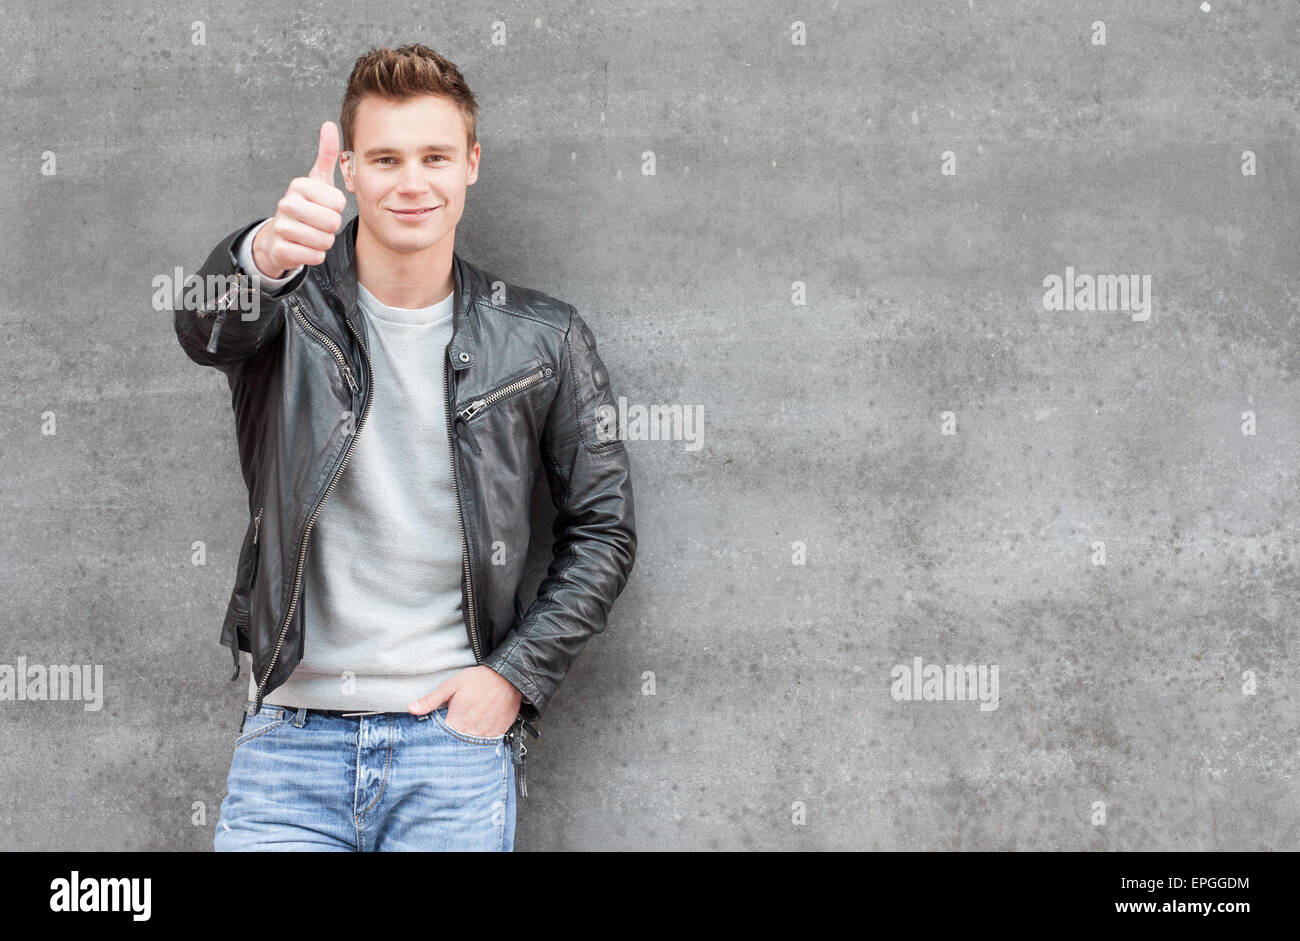 Casual young guy showing thumbs up Stock Photo